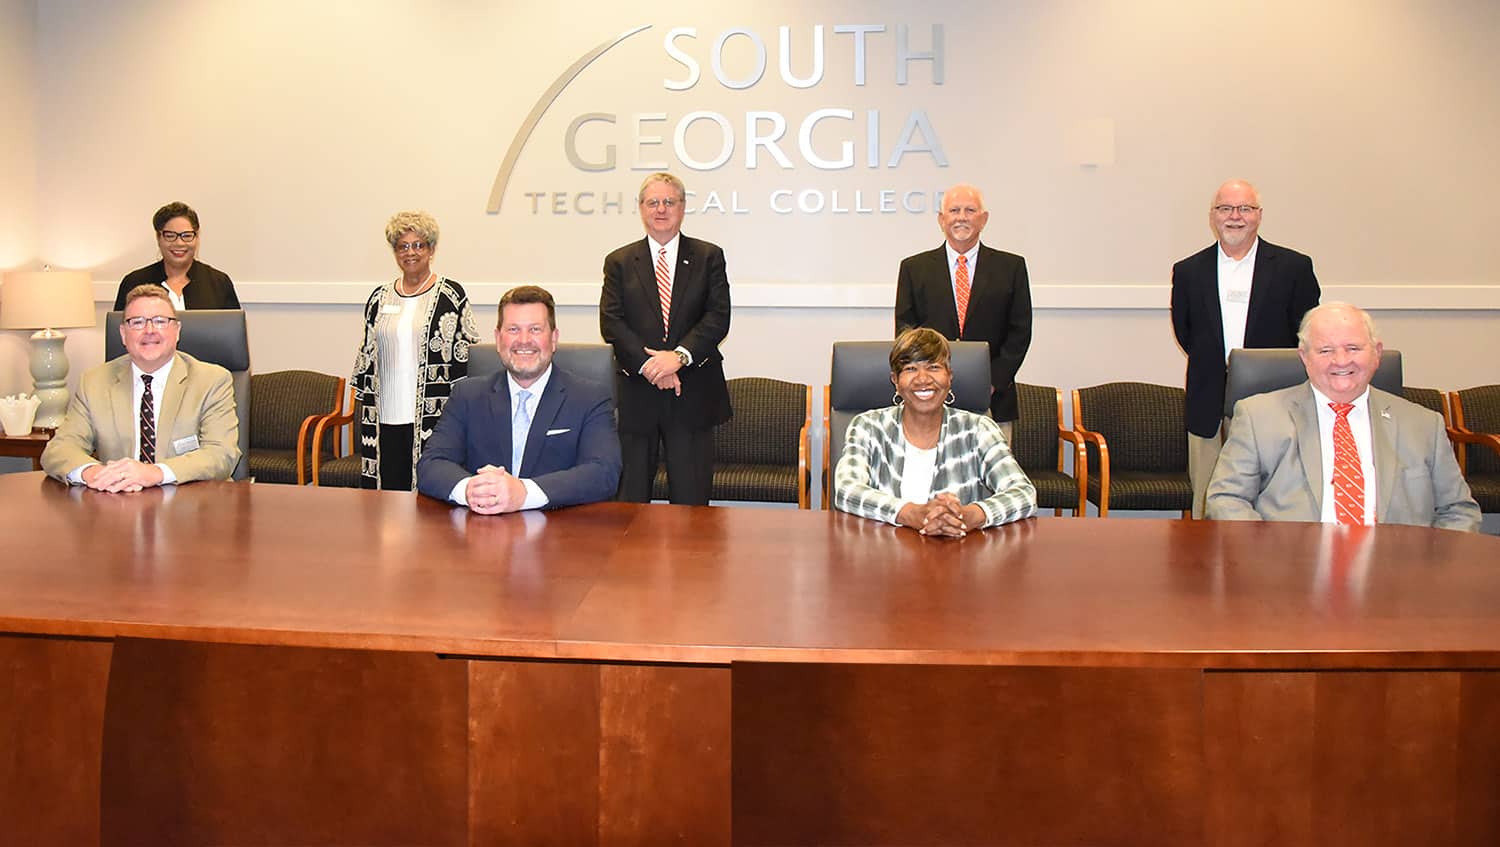 SGTC President Dr. John Watford (seated, second from left) is shown above with the SGTC Board of Directors for 2020 – 2021. Shown seated (l to r) with the Board of Directors is SGTC Chair Don Porter, Dr. Watford, SGTC Vice Chair Janet Siders, and SGTC former chair Jimmy Davis. Shown standing on the back row are: Executive Assistant to the President Teresa O’Bryant, Mattye Gordon, Richard McCorkle, Jake Everett, and George Bryce.